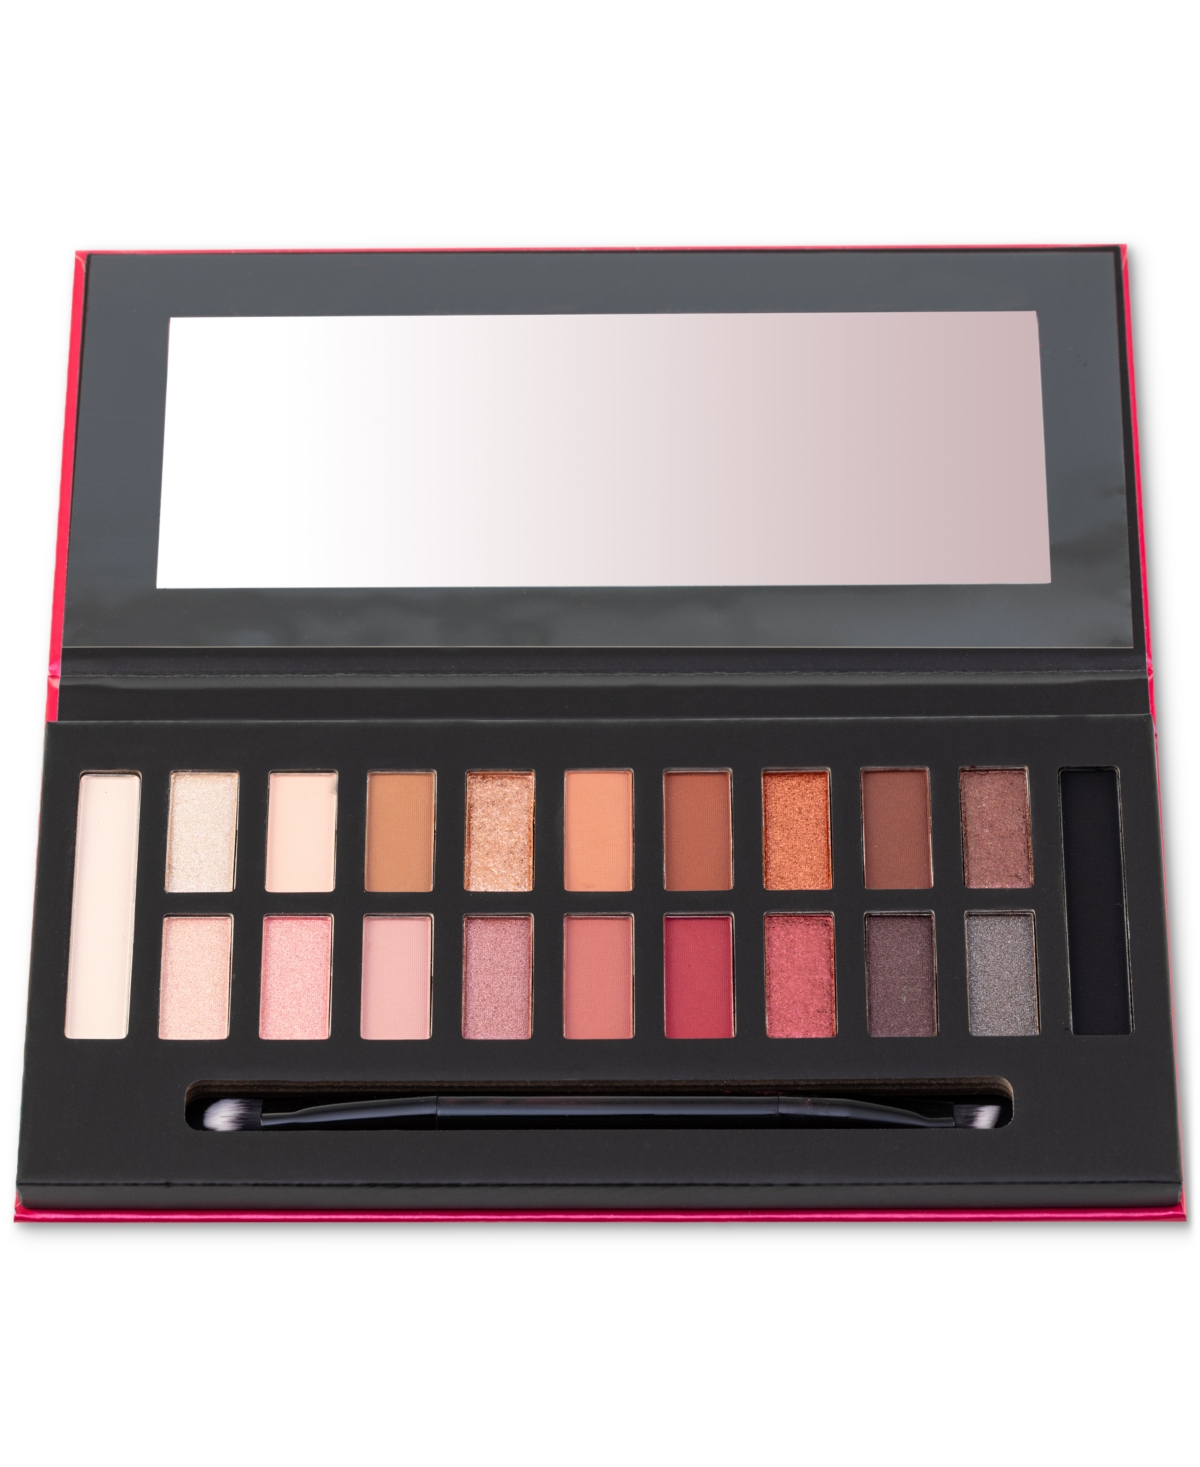 Everyday Glam Eyeshadow Palette, Created for Macy's - Pink